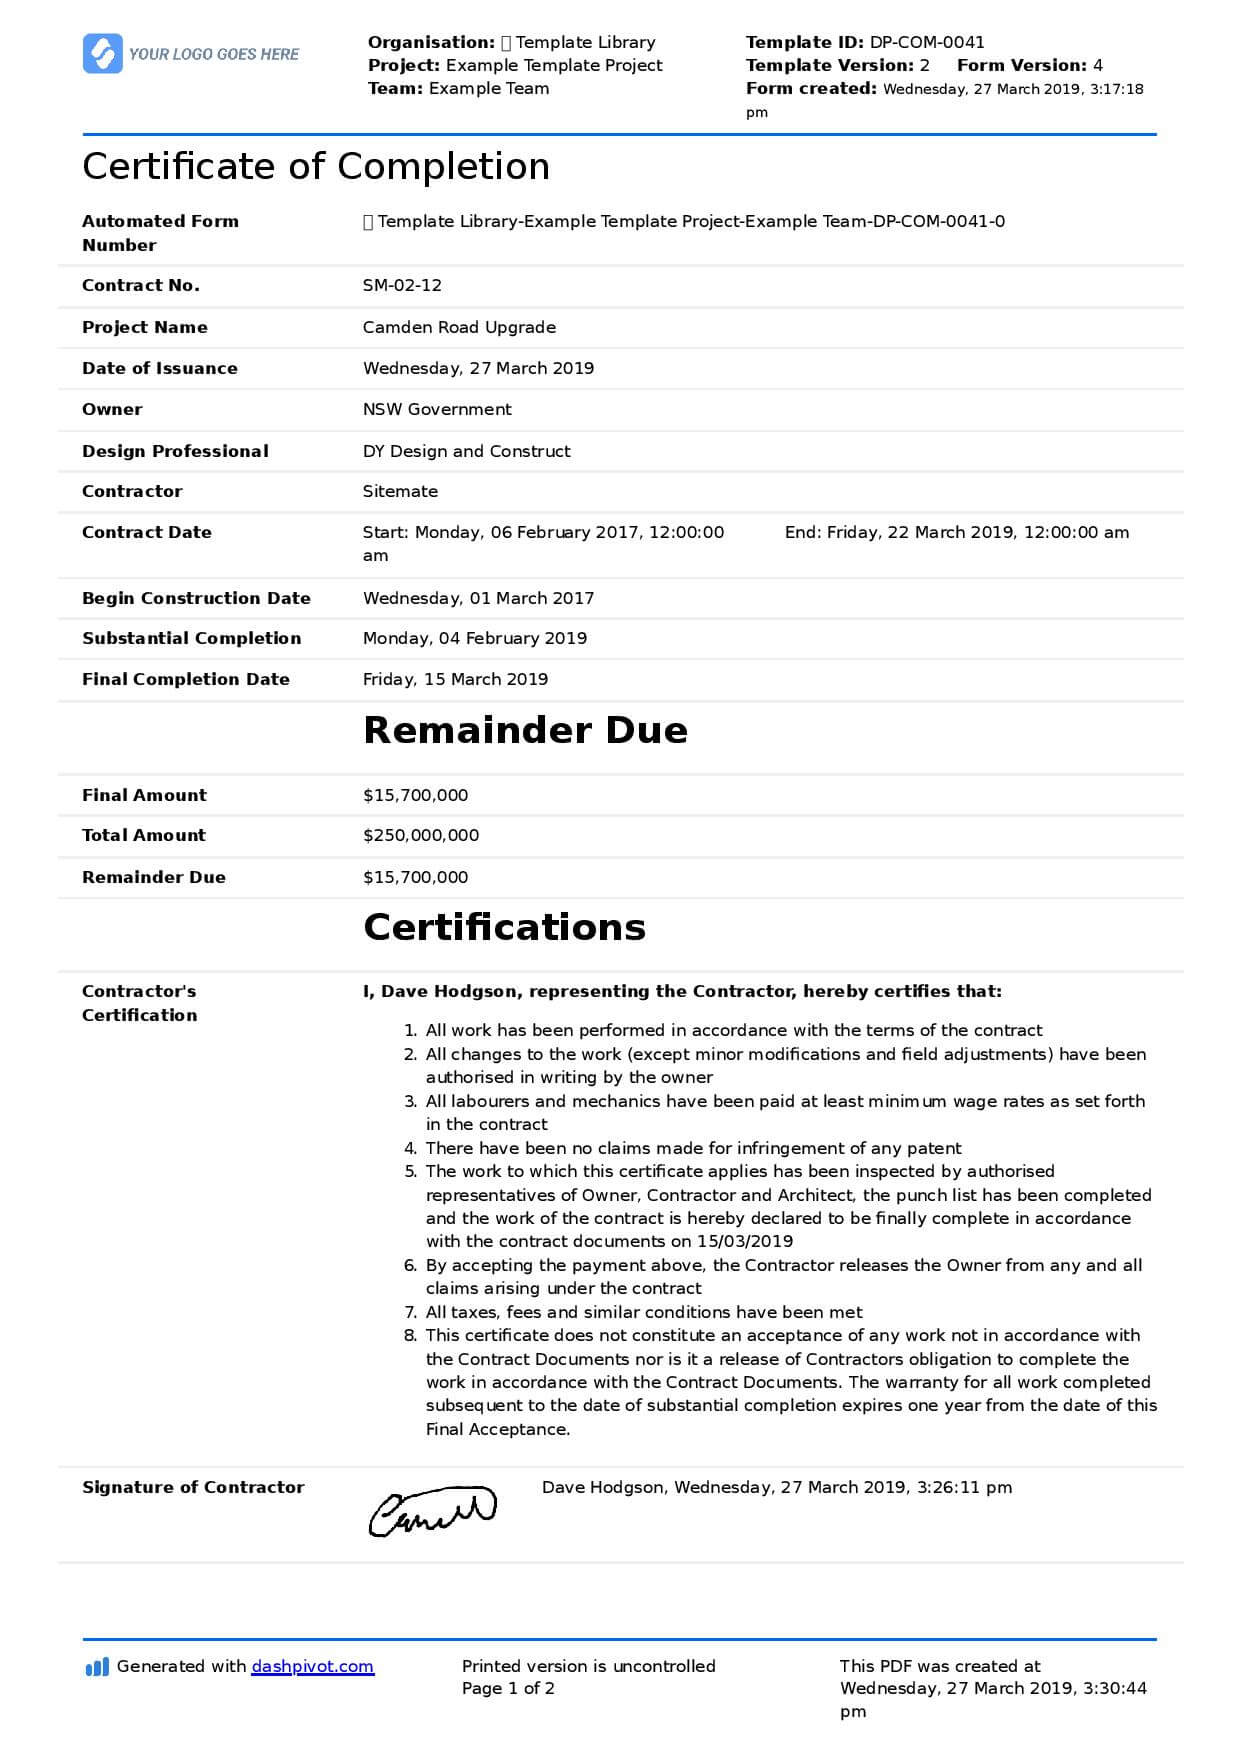 Certificate Of Completion For Construction (Free Template + Throughout Certificate Of Acceptance Template